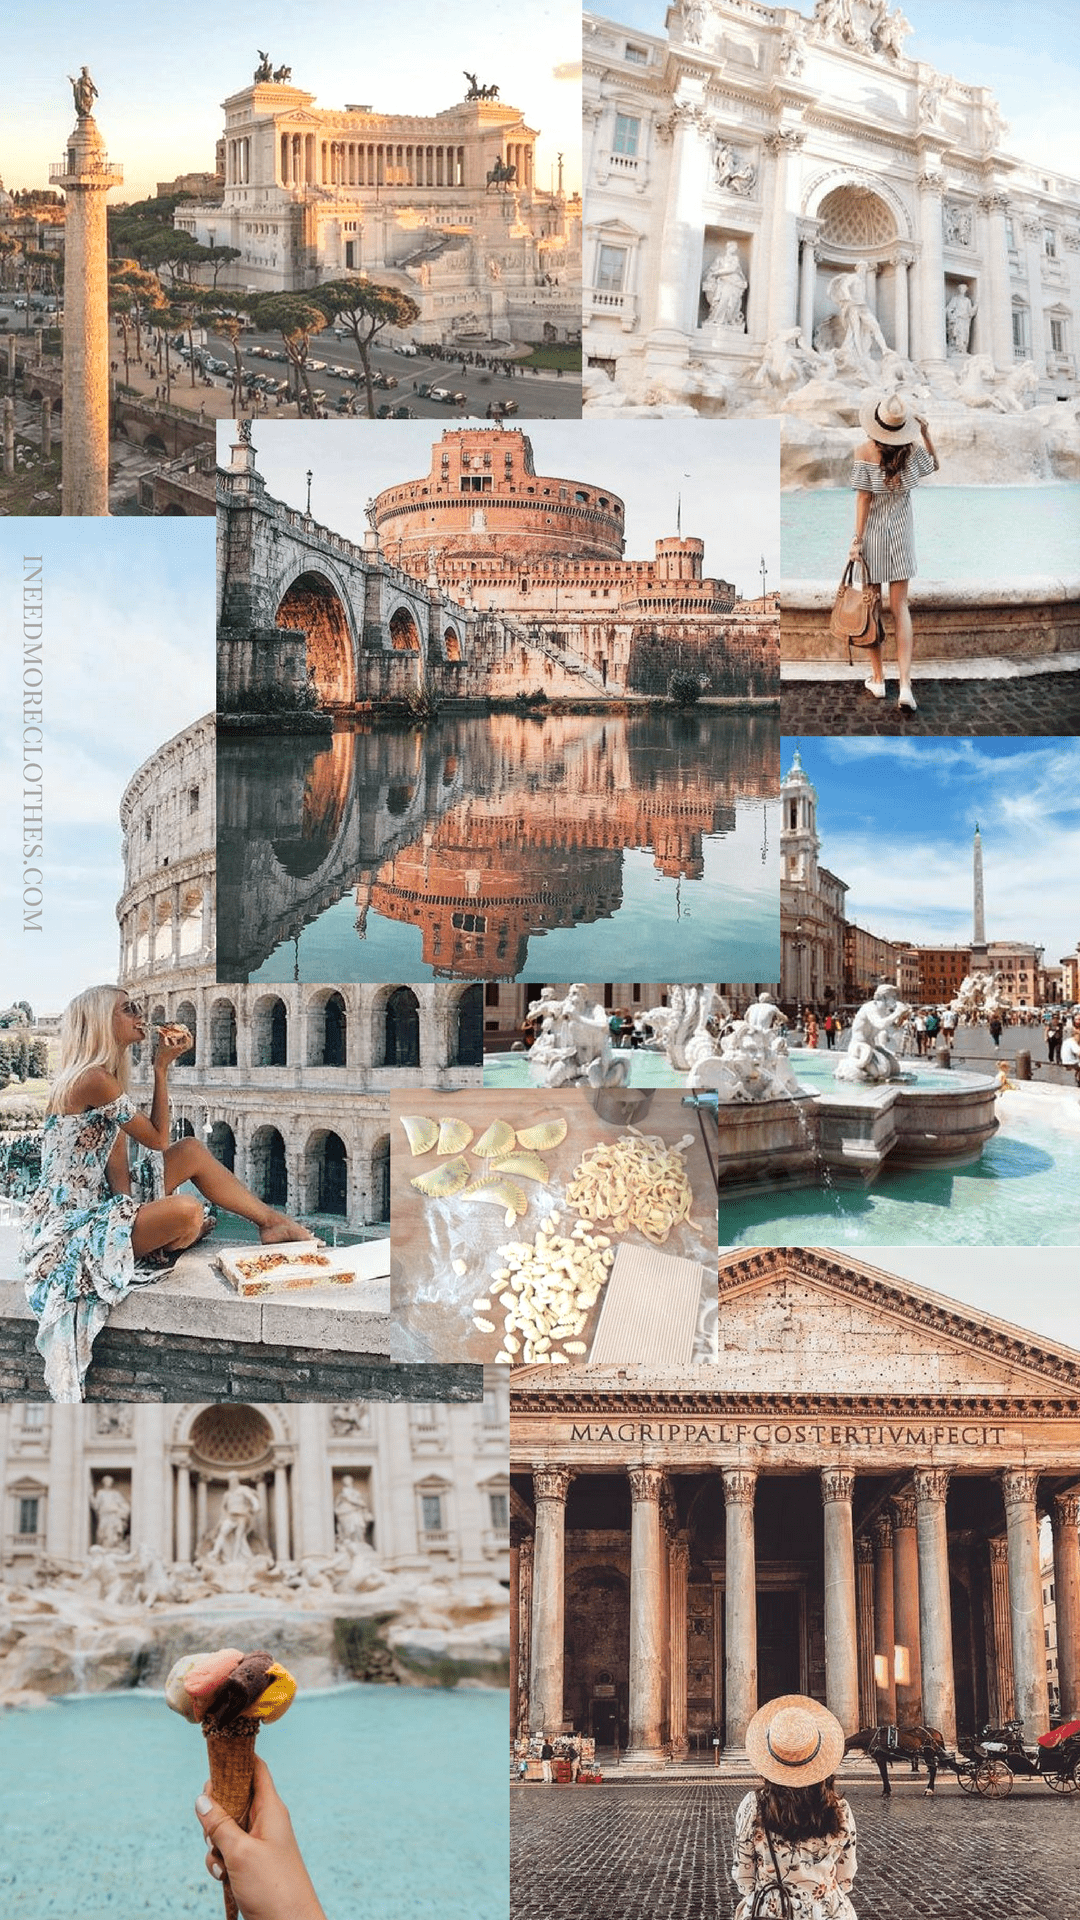 Rome Phone Wallpapers Top Free Rome Phone Backgrounds Wallpaperaccess